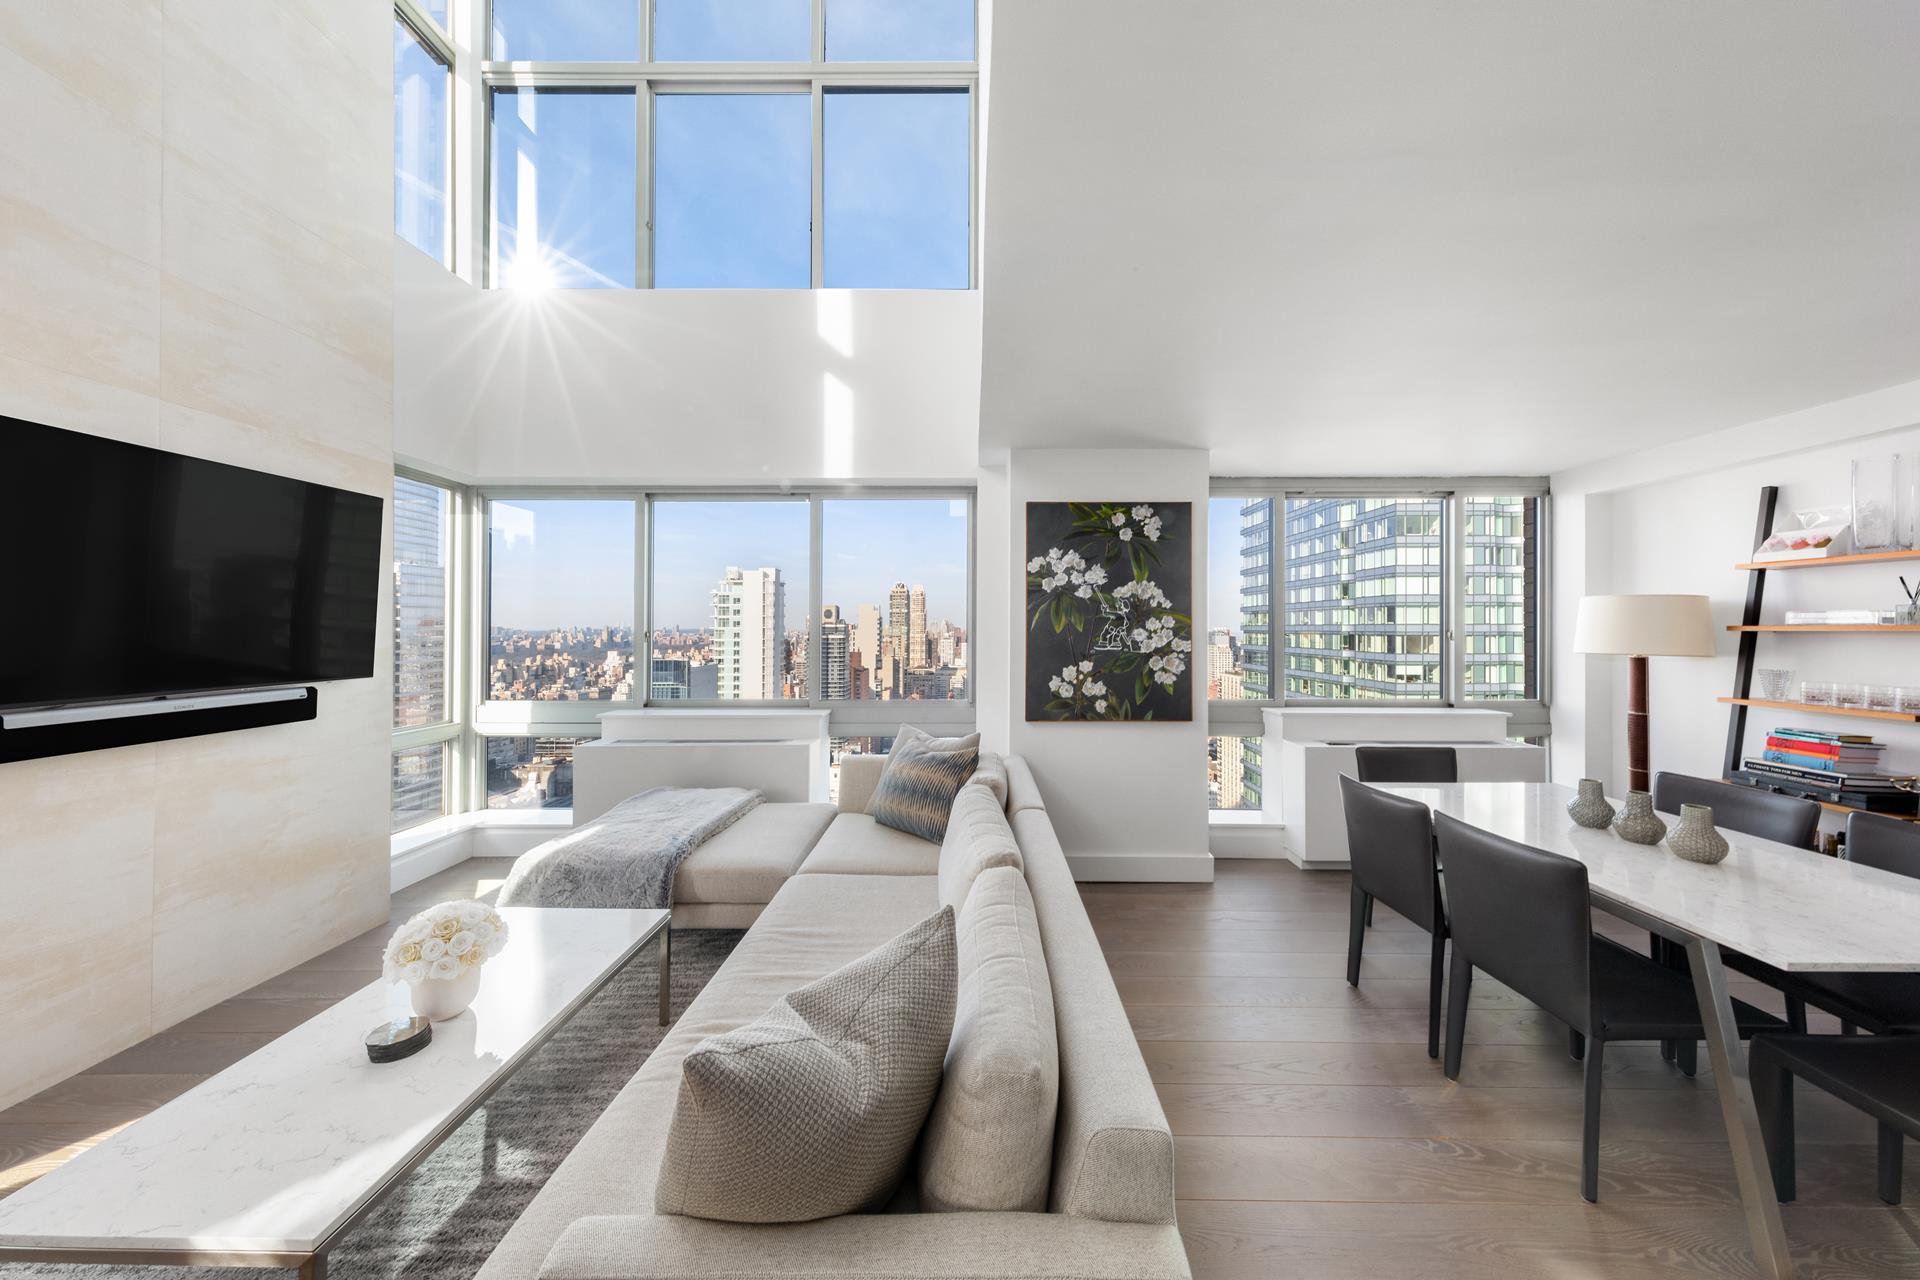 235 East 55th Street Phb, Sutton, Midtown East, NYC - 2 Bedrooms  
3 Bathrooms  
4 Rooms - 